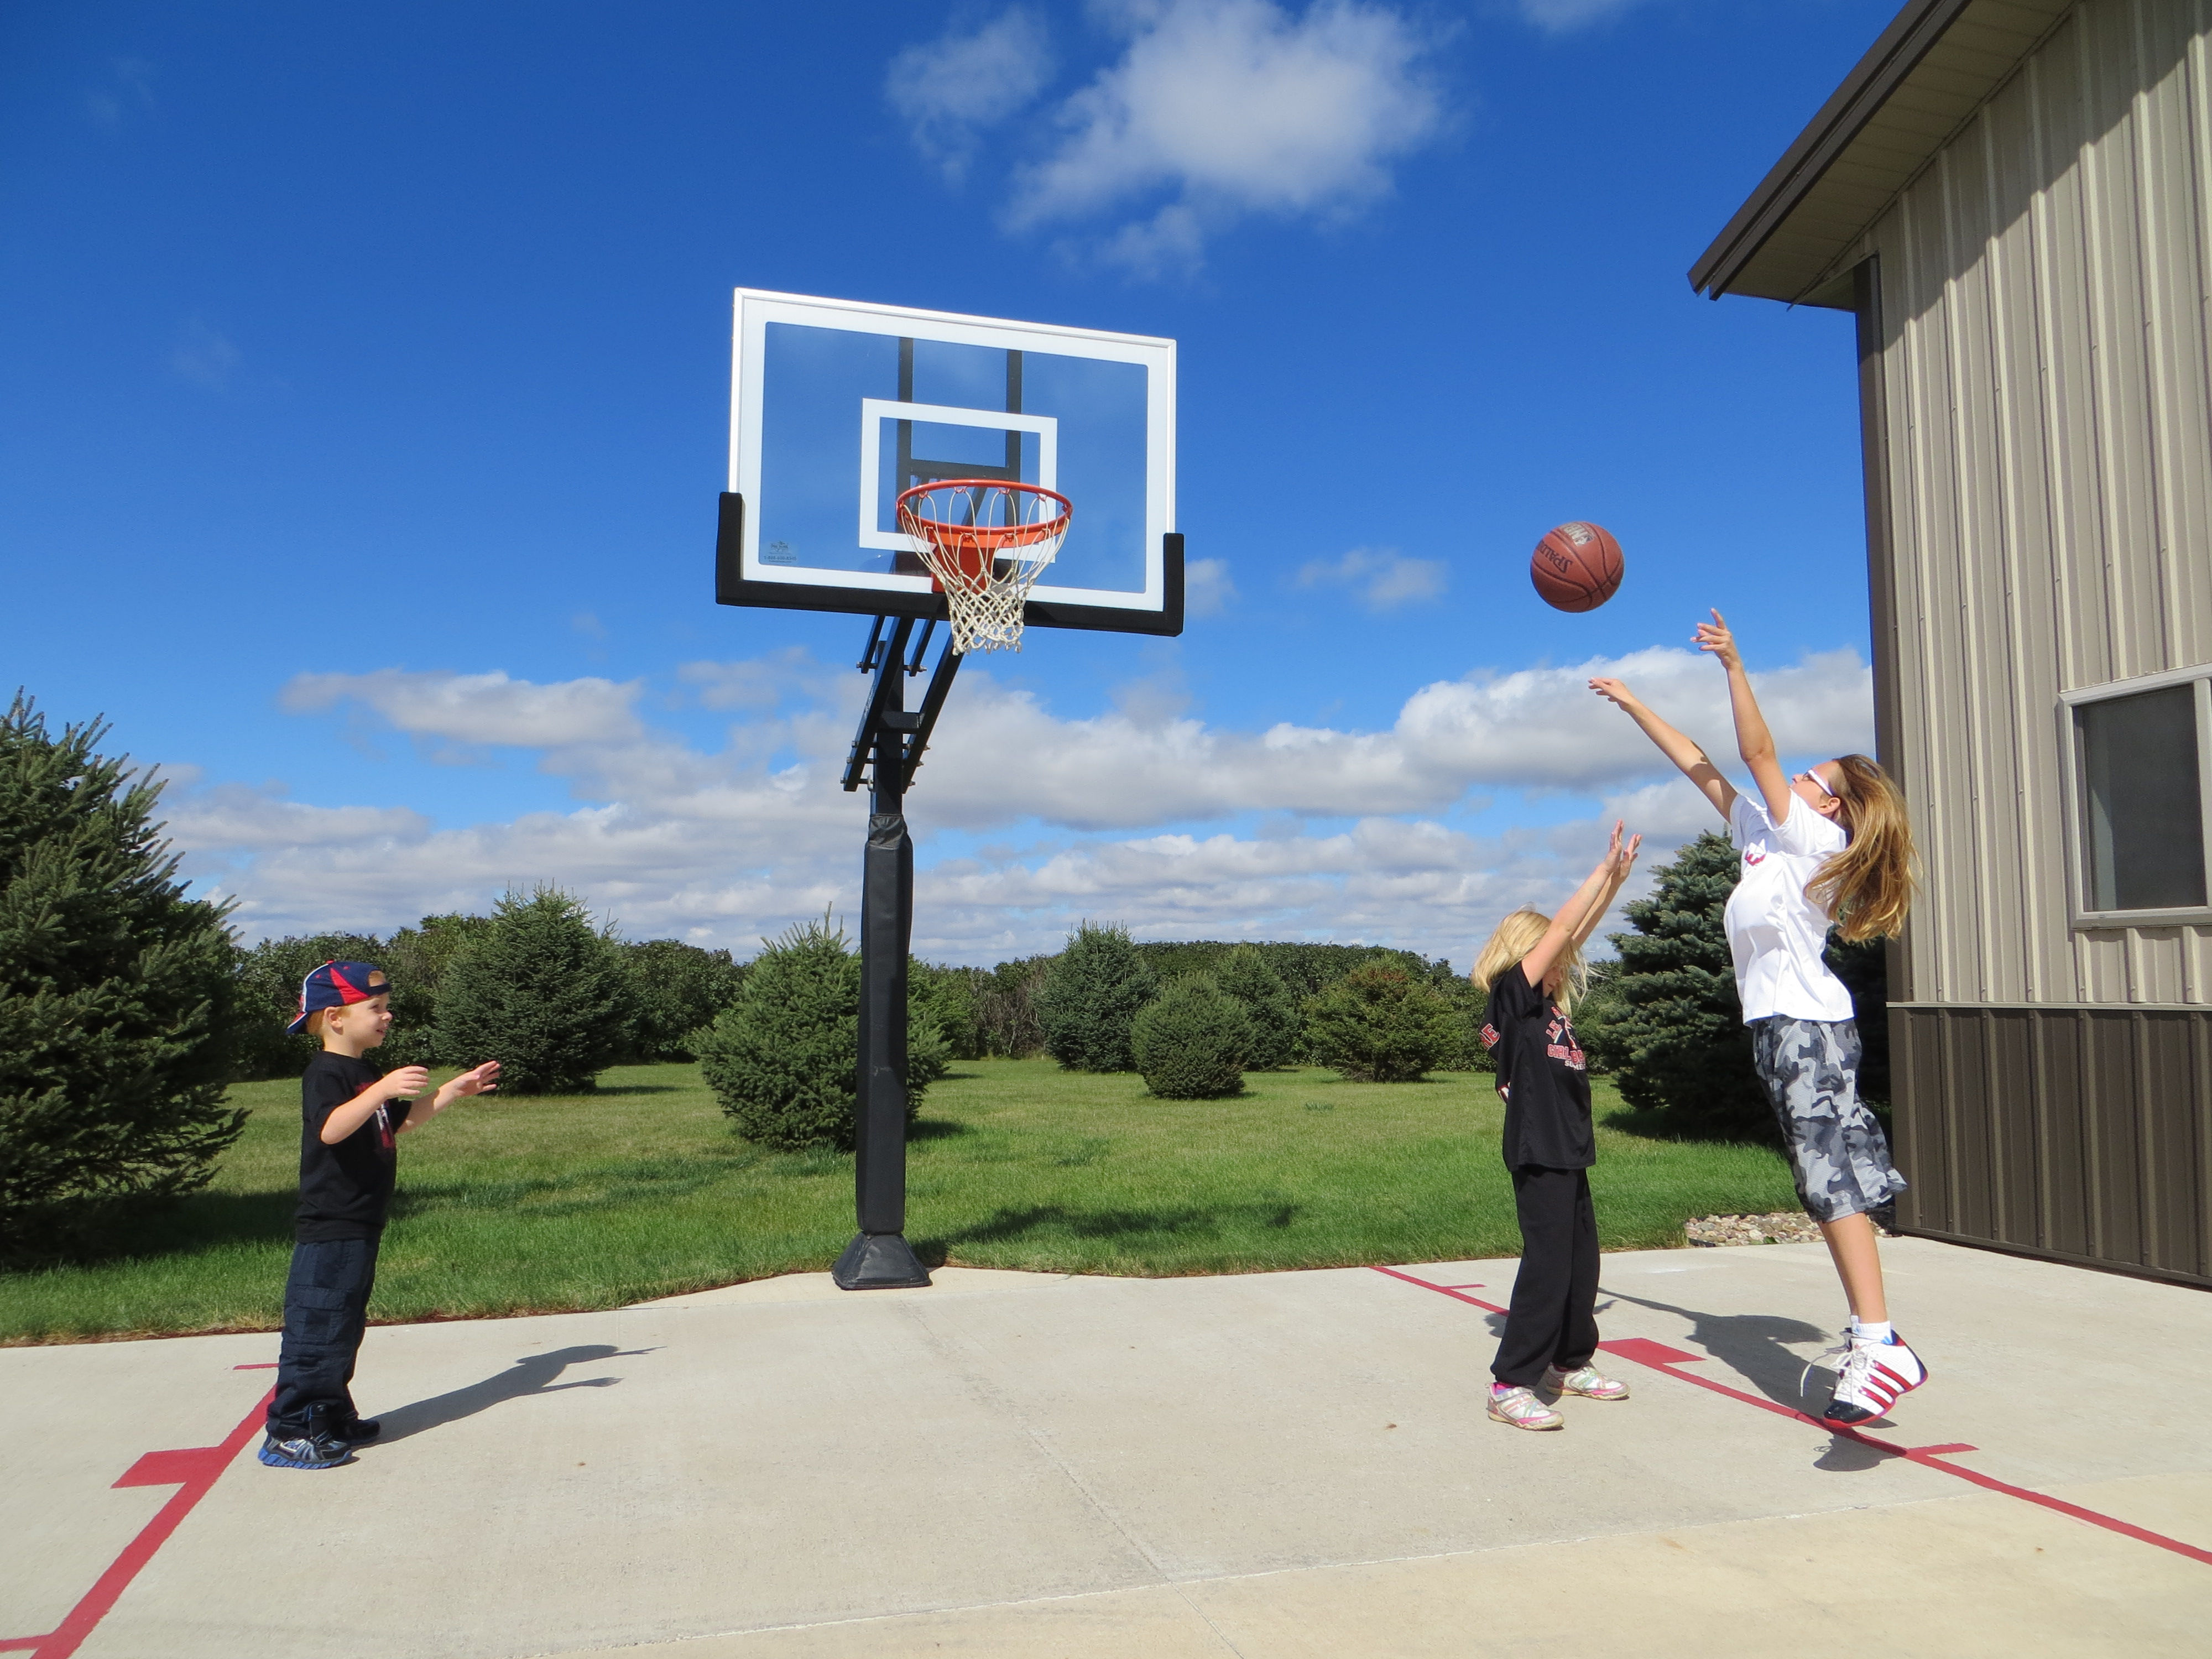 Their kids really enjoy playing basketball with the Pro Dunk Hoop.